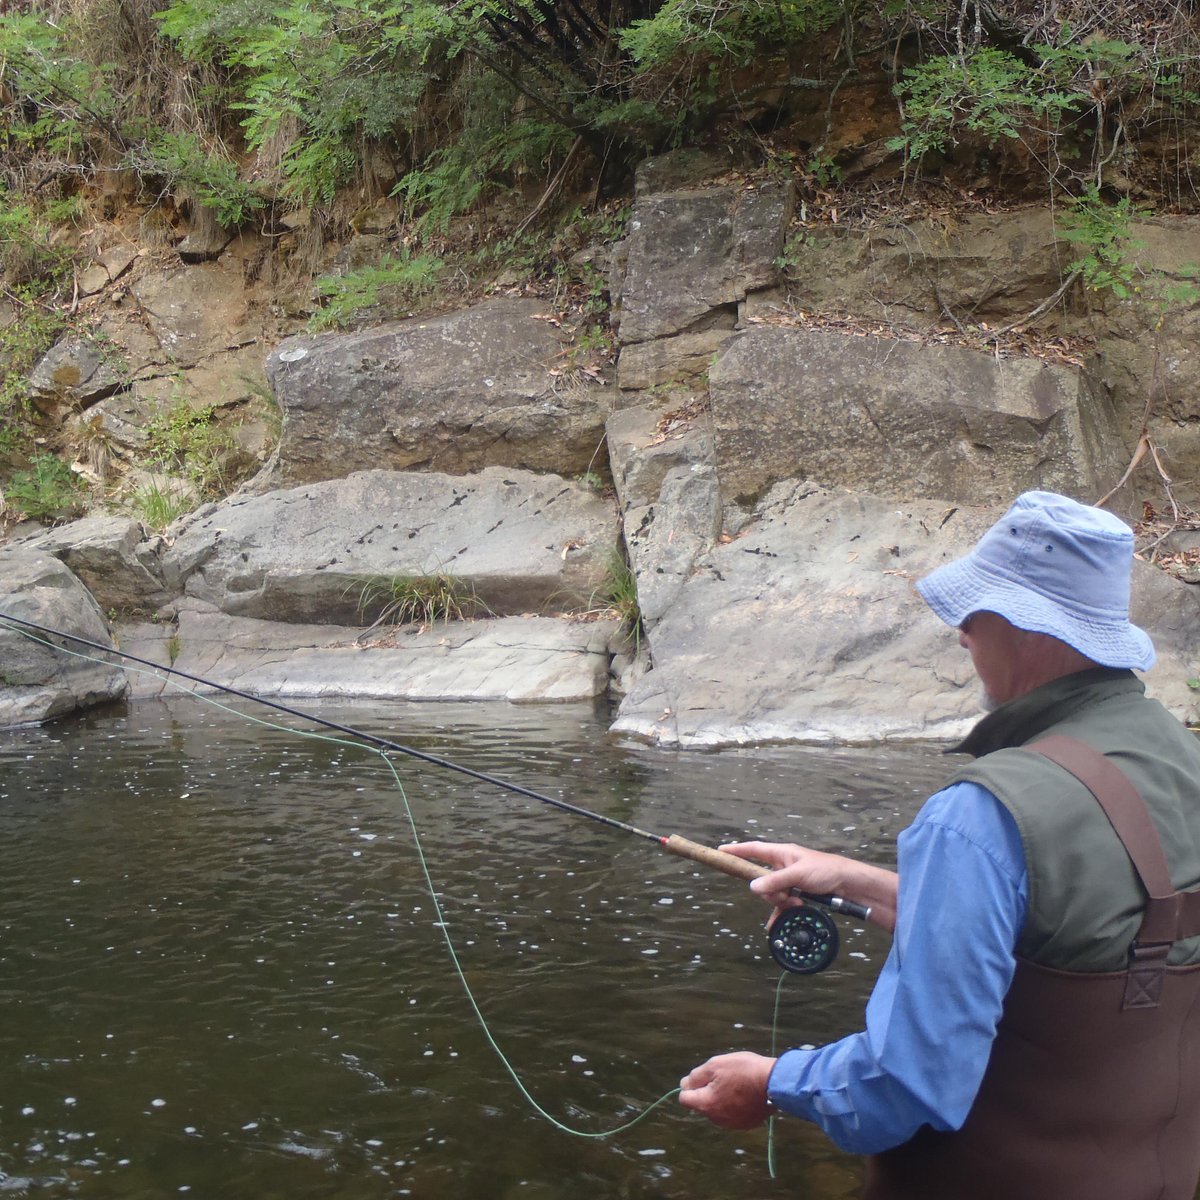 Private Fly Fishing Lessons - just 2 hours from Melbourne's C.B.D.